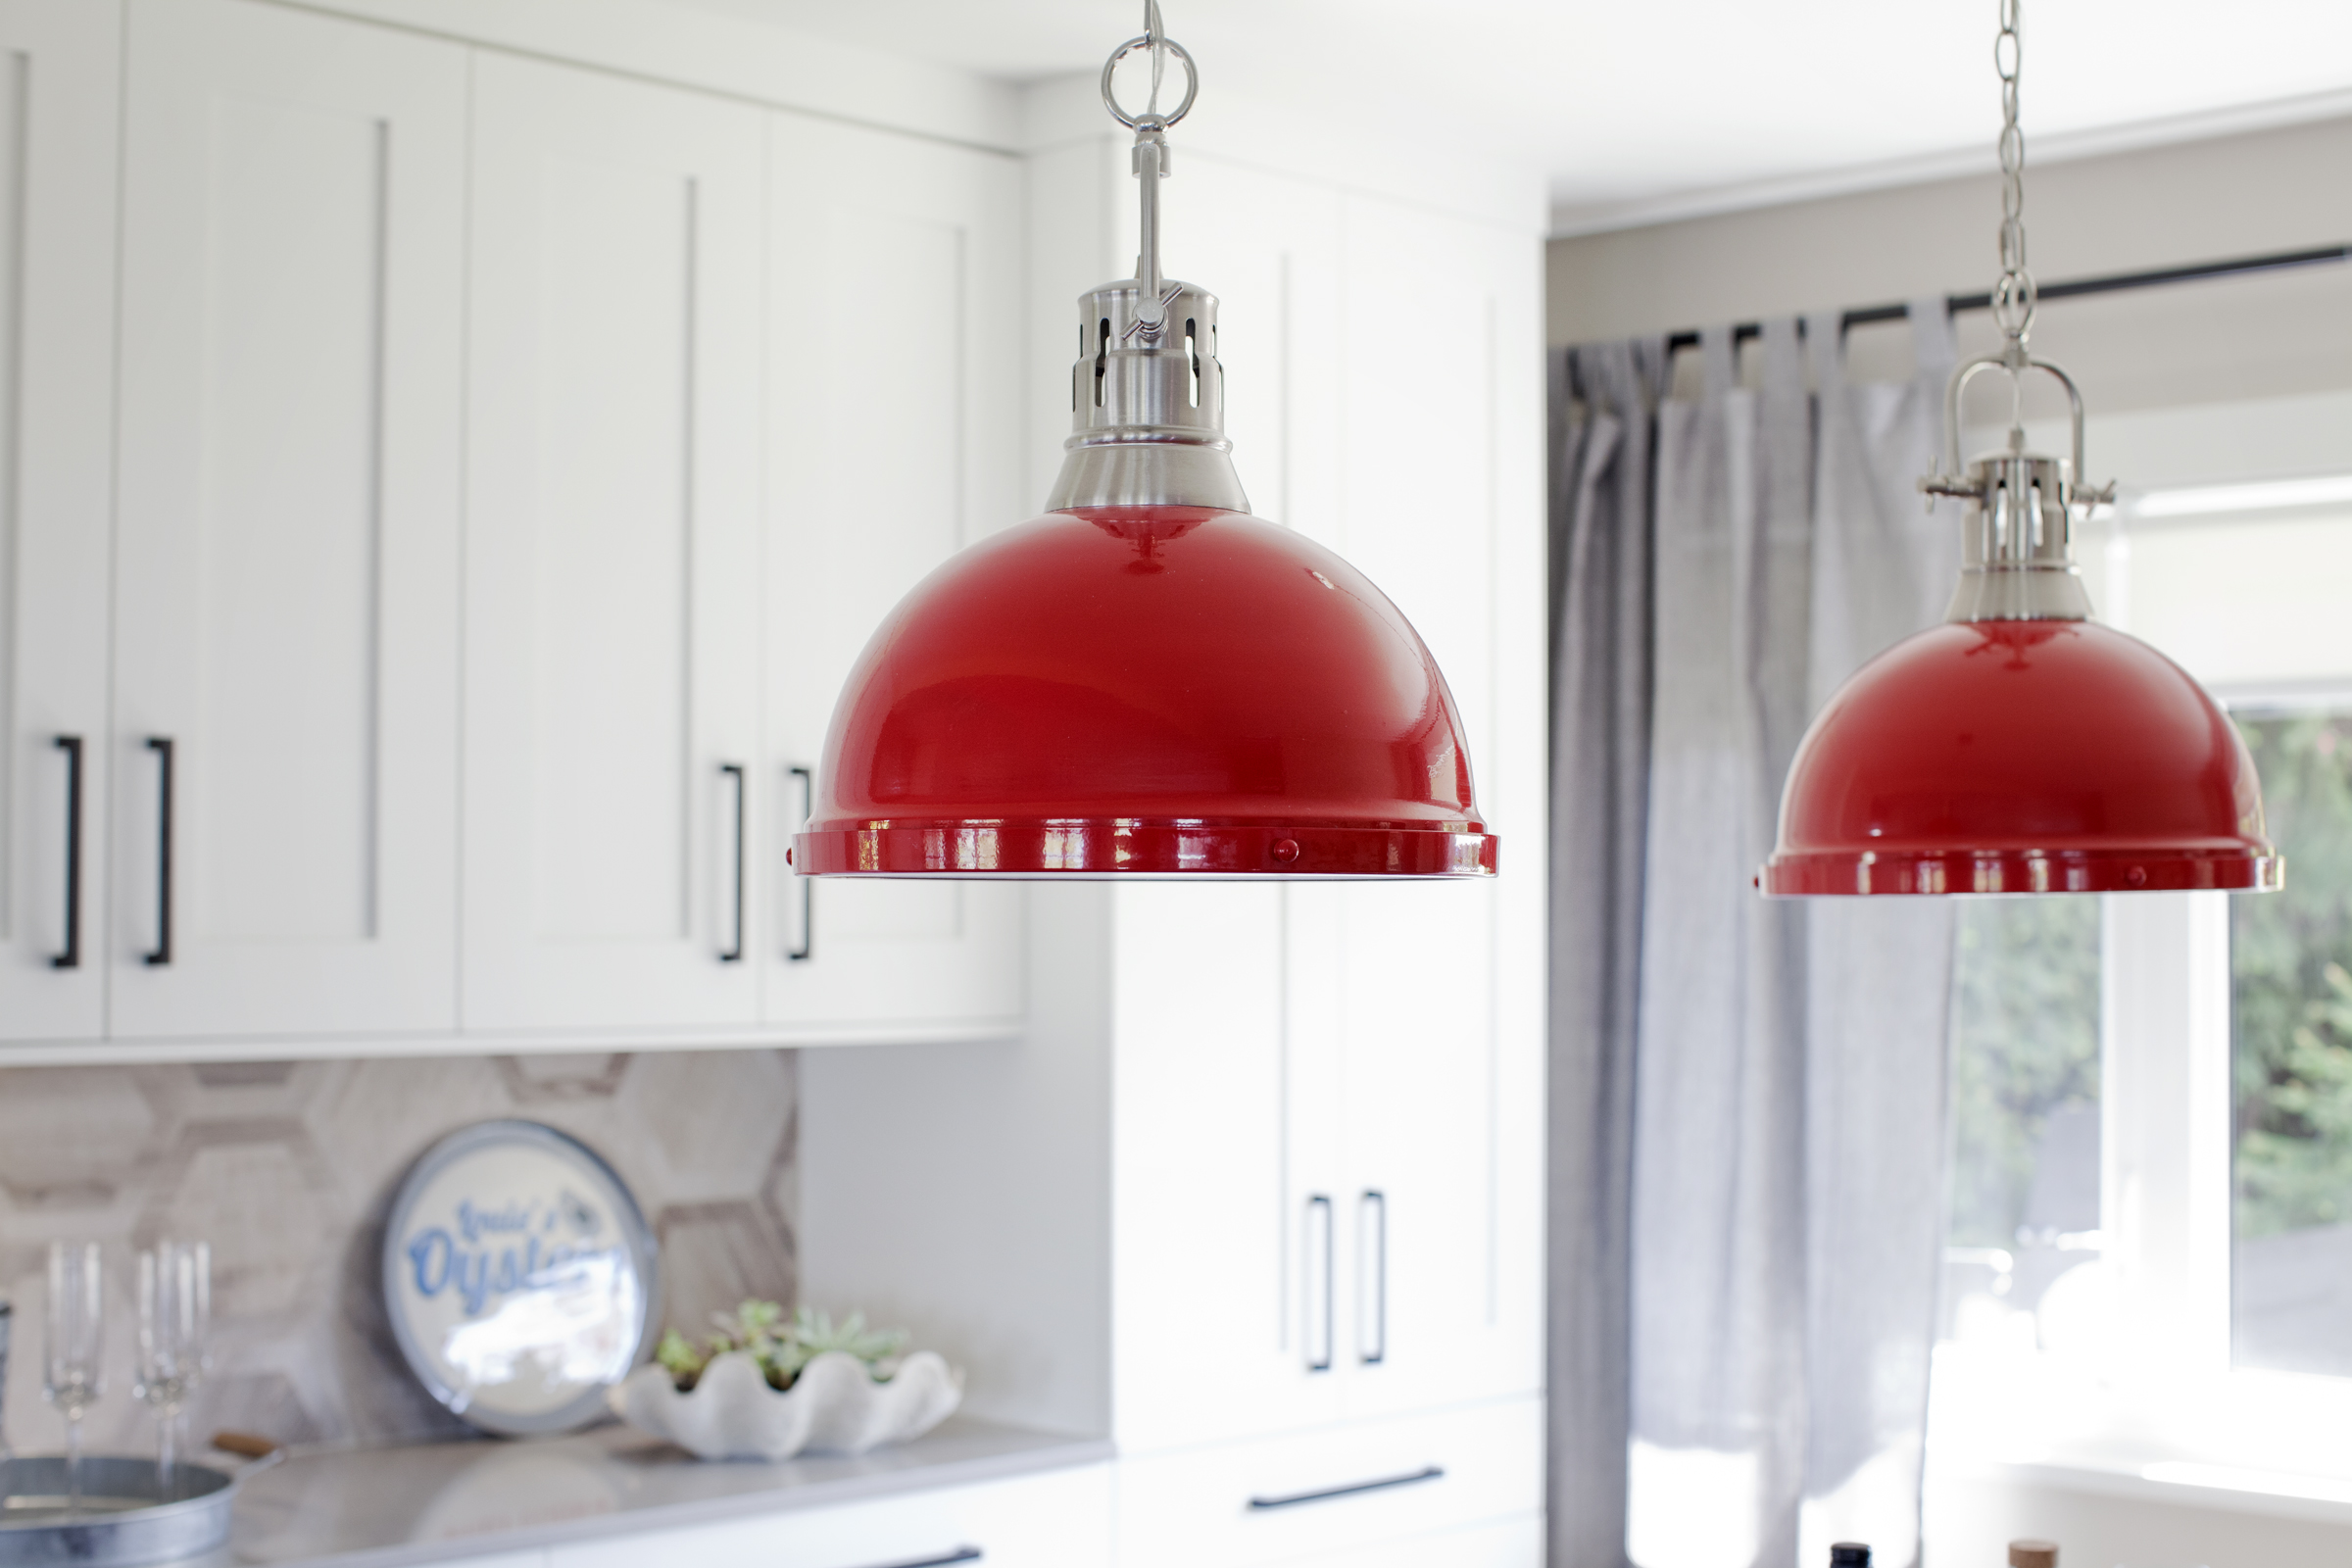 Modern kitchen with red pendant lights.